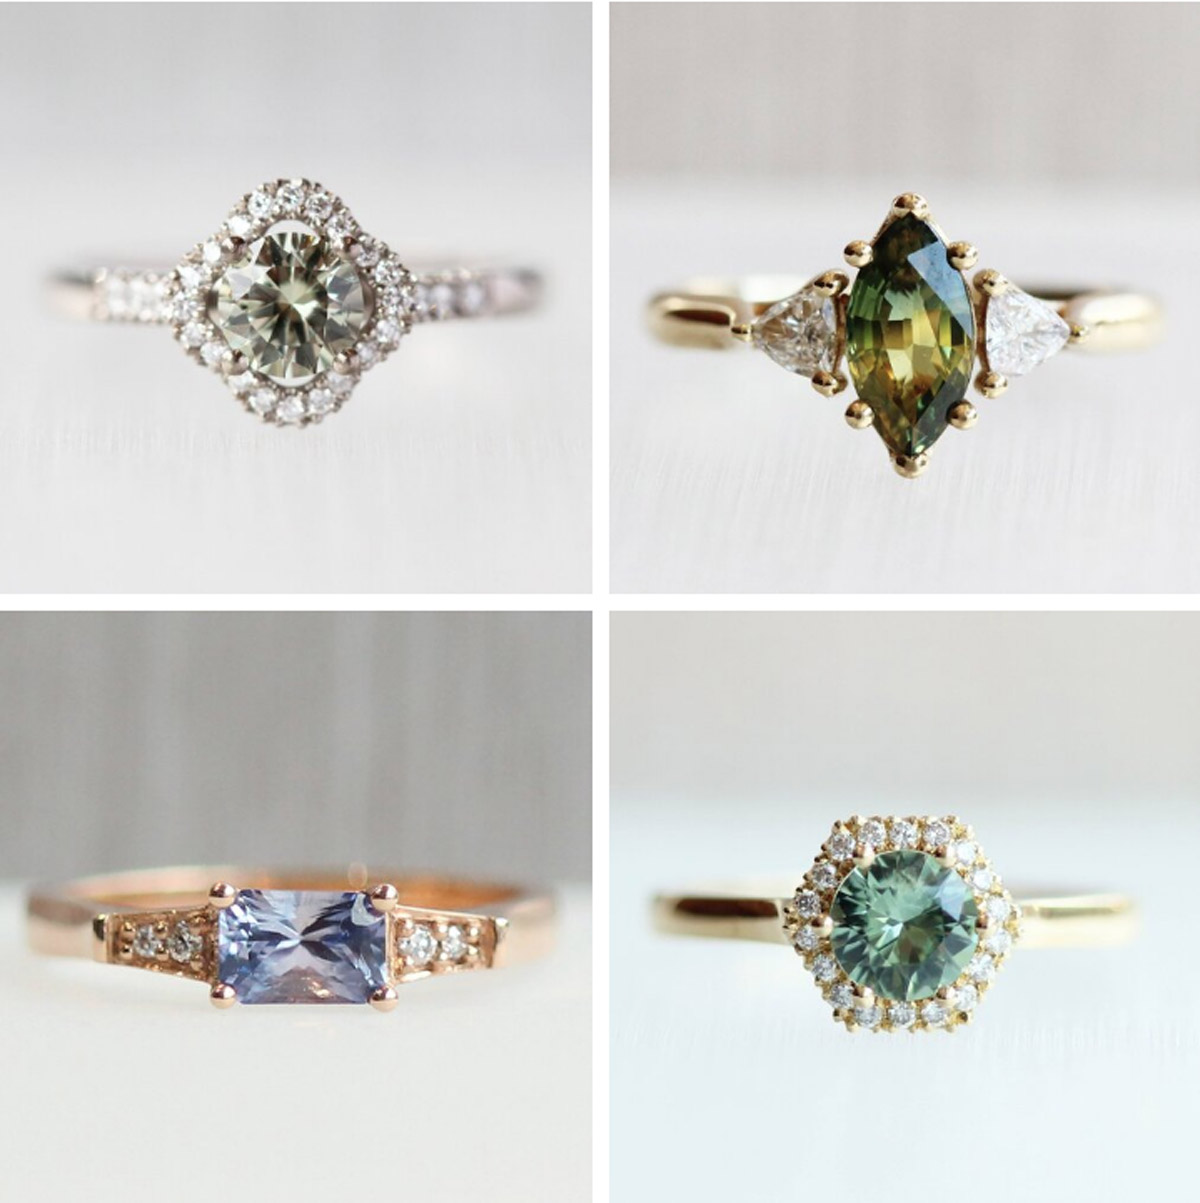 What Are The Popular Engagement Ring Trends For 2020?